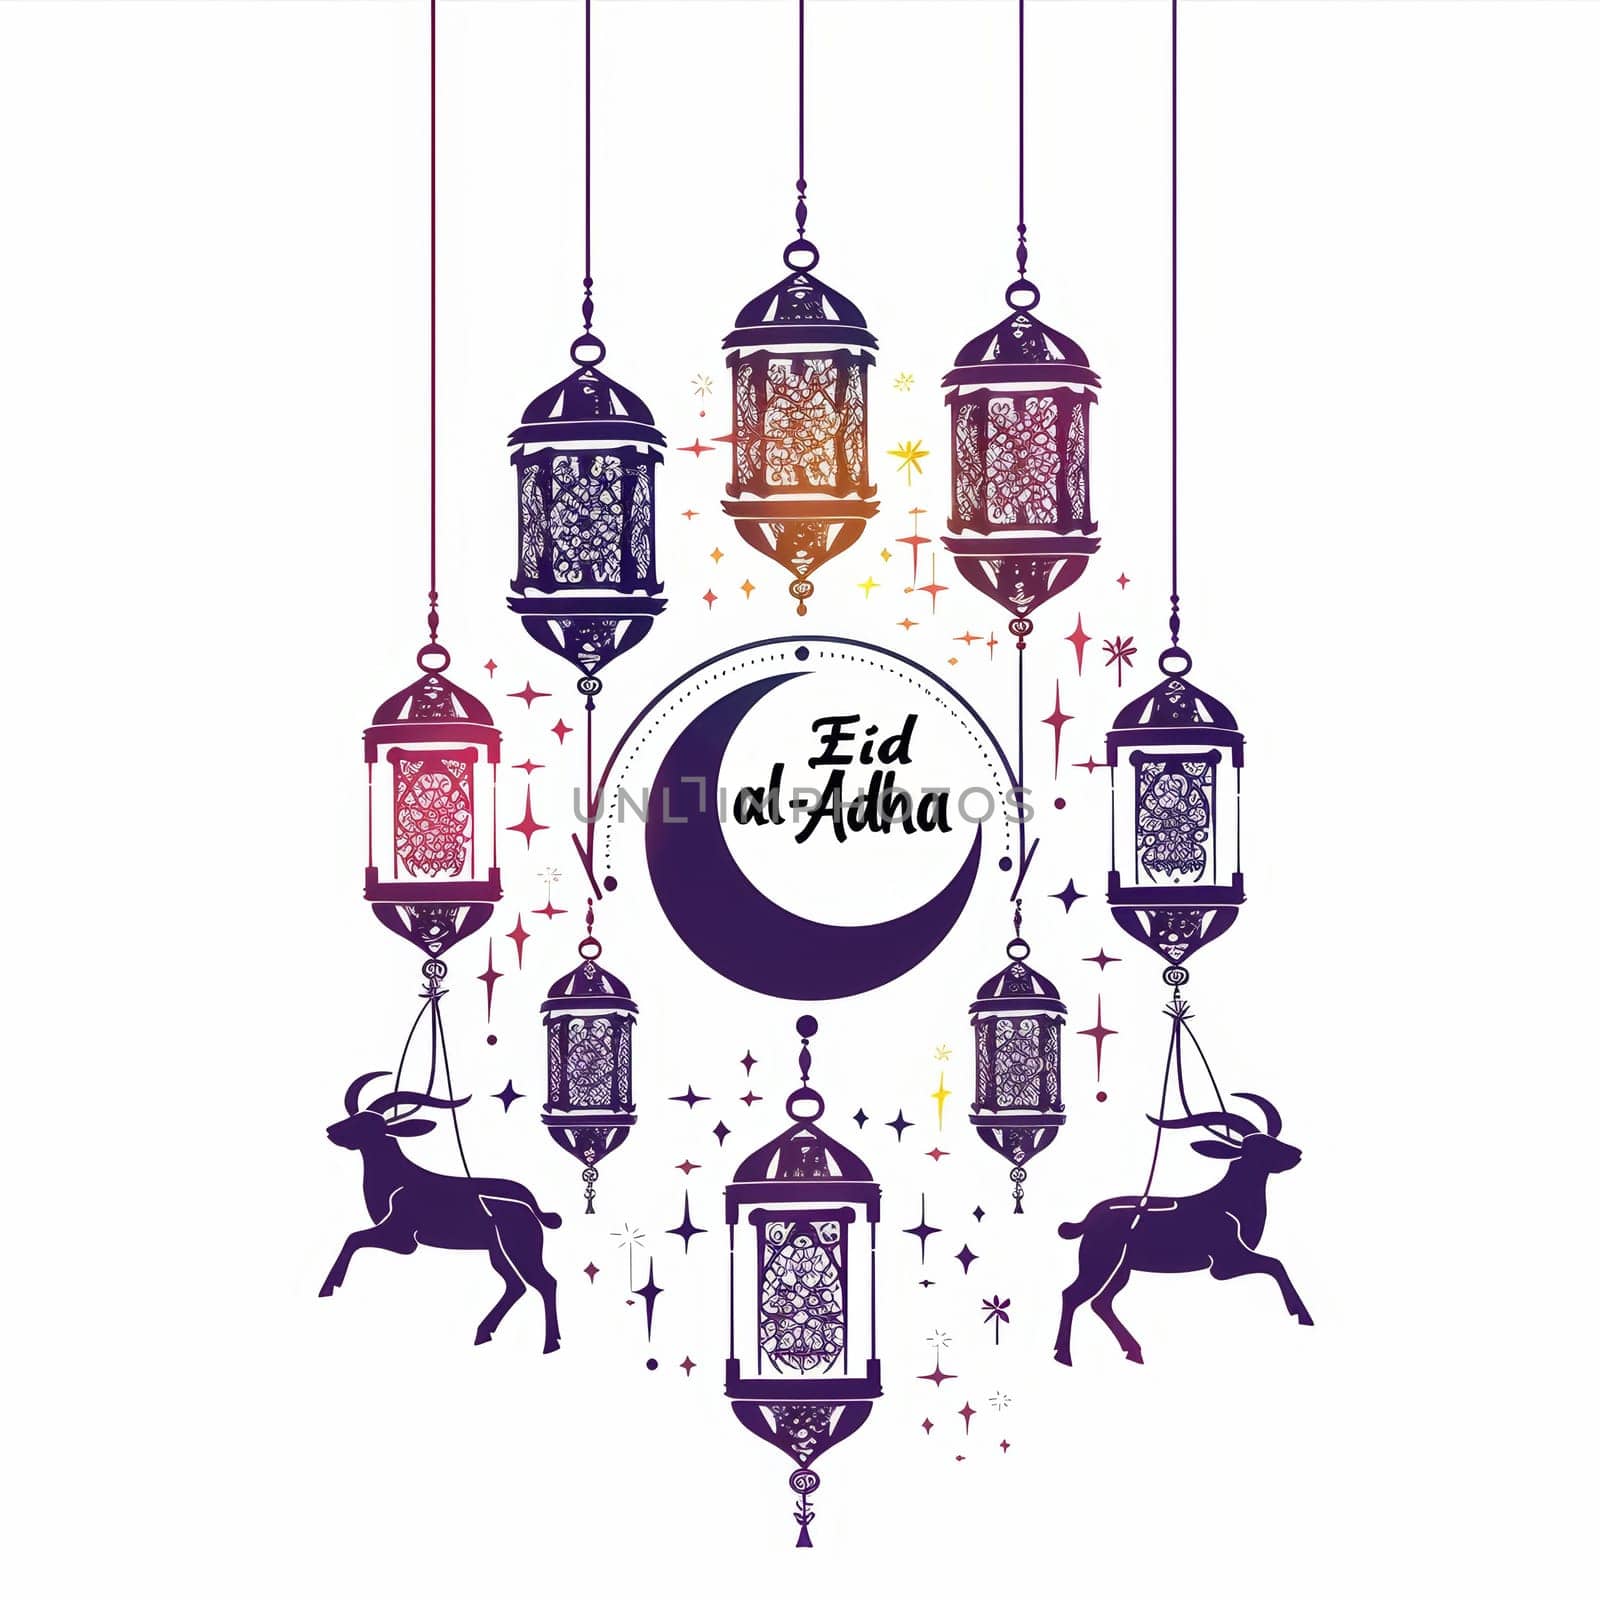 A colorful Eid al-Adha greeting with detailed lanterns and starry accents, featuring a leaping goat. by sfinks